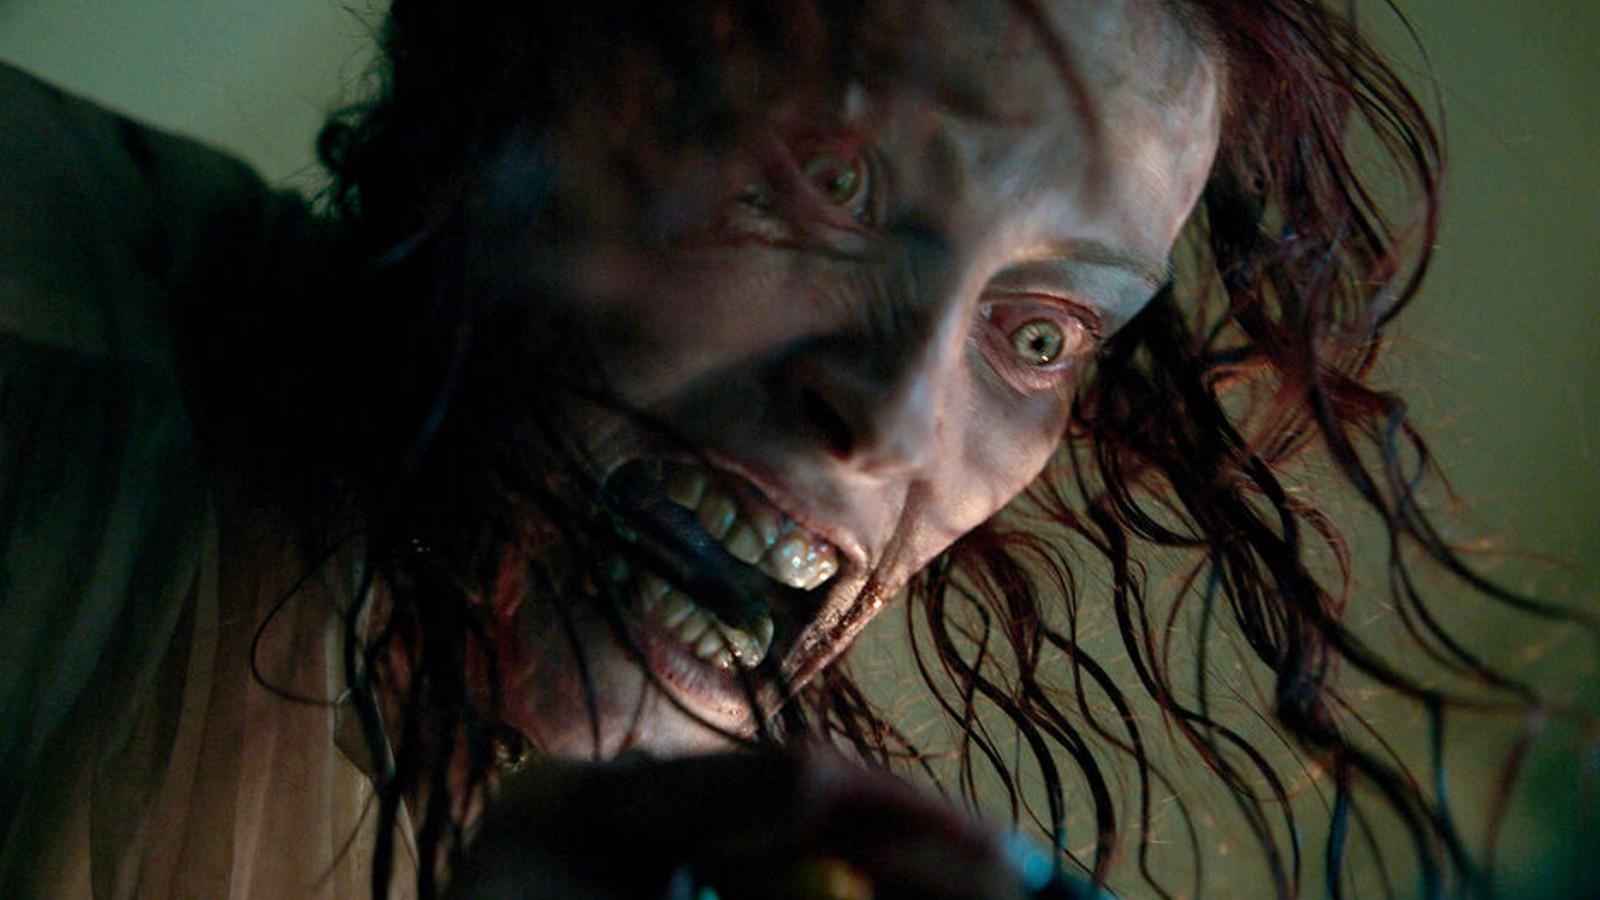 How to watch The Evil Dead this Halloween